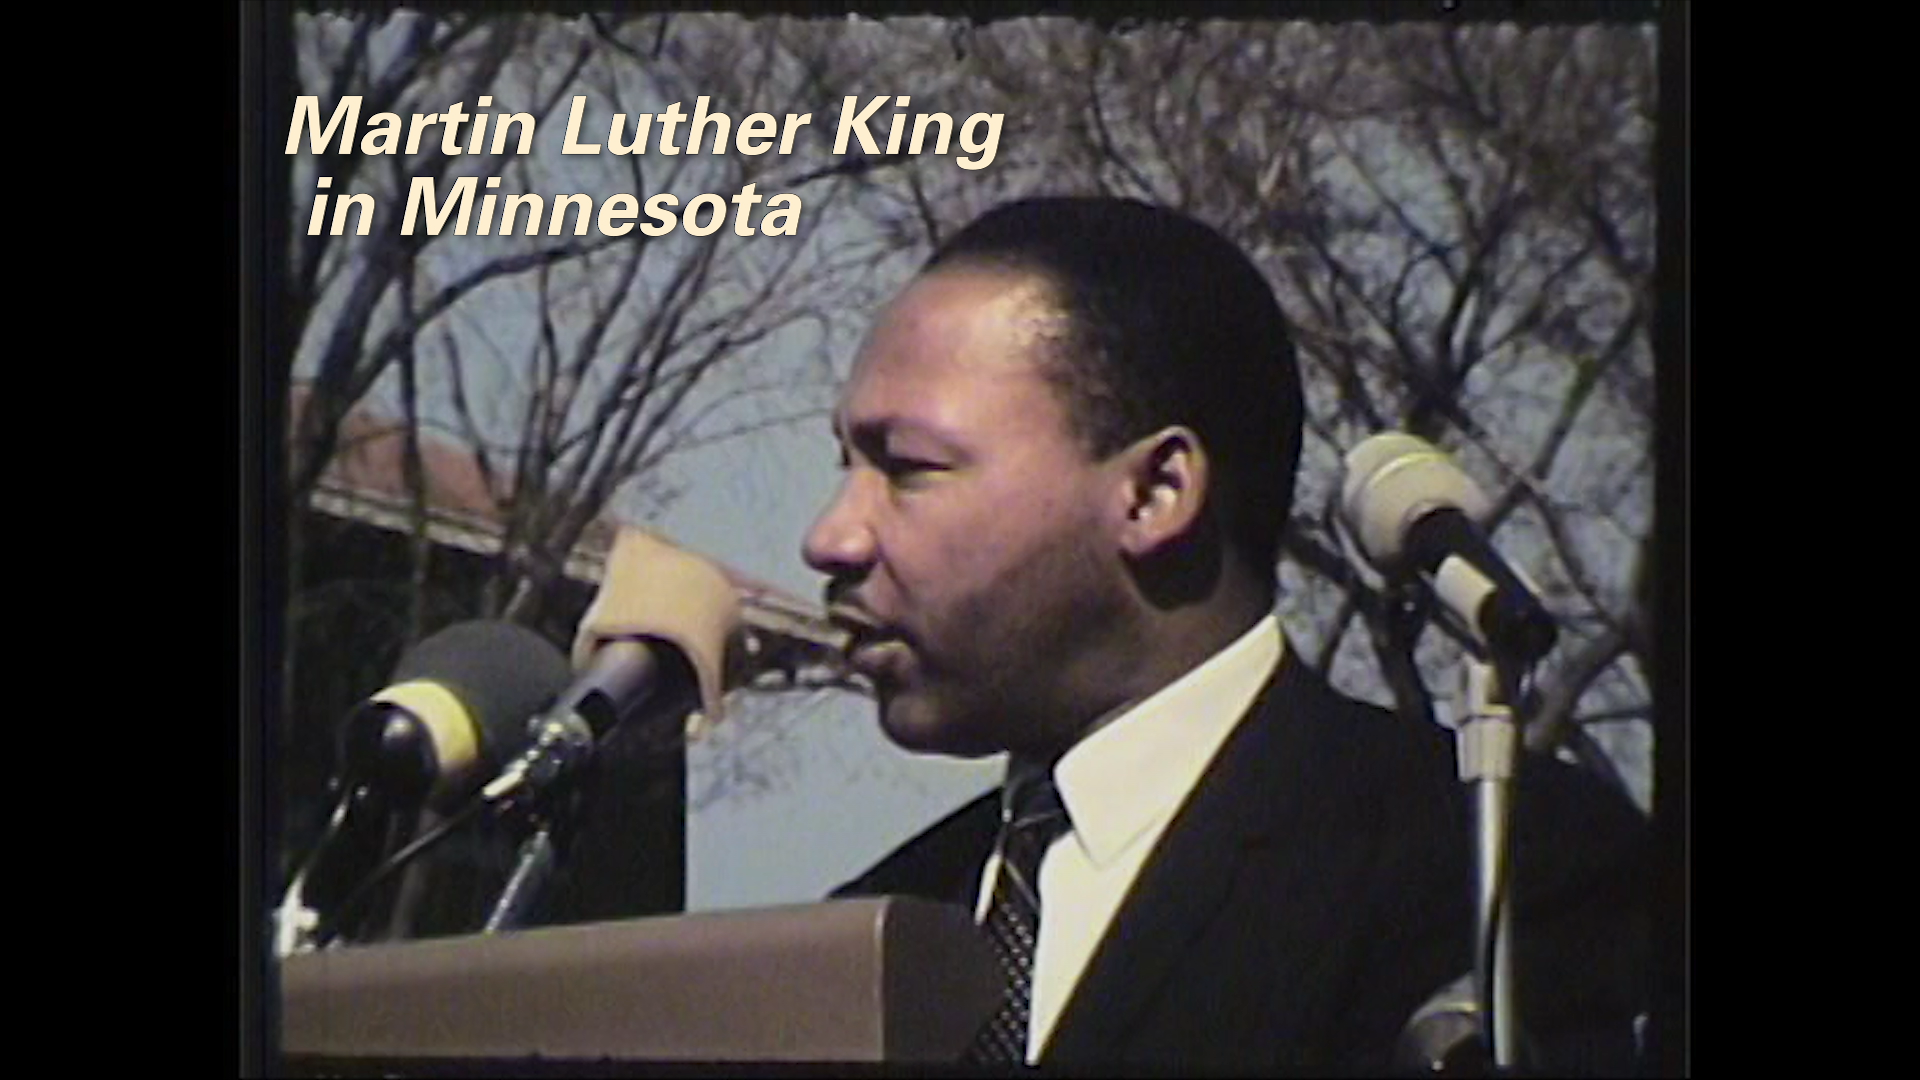 Martin Luther King in Minnesota